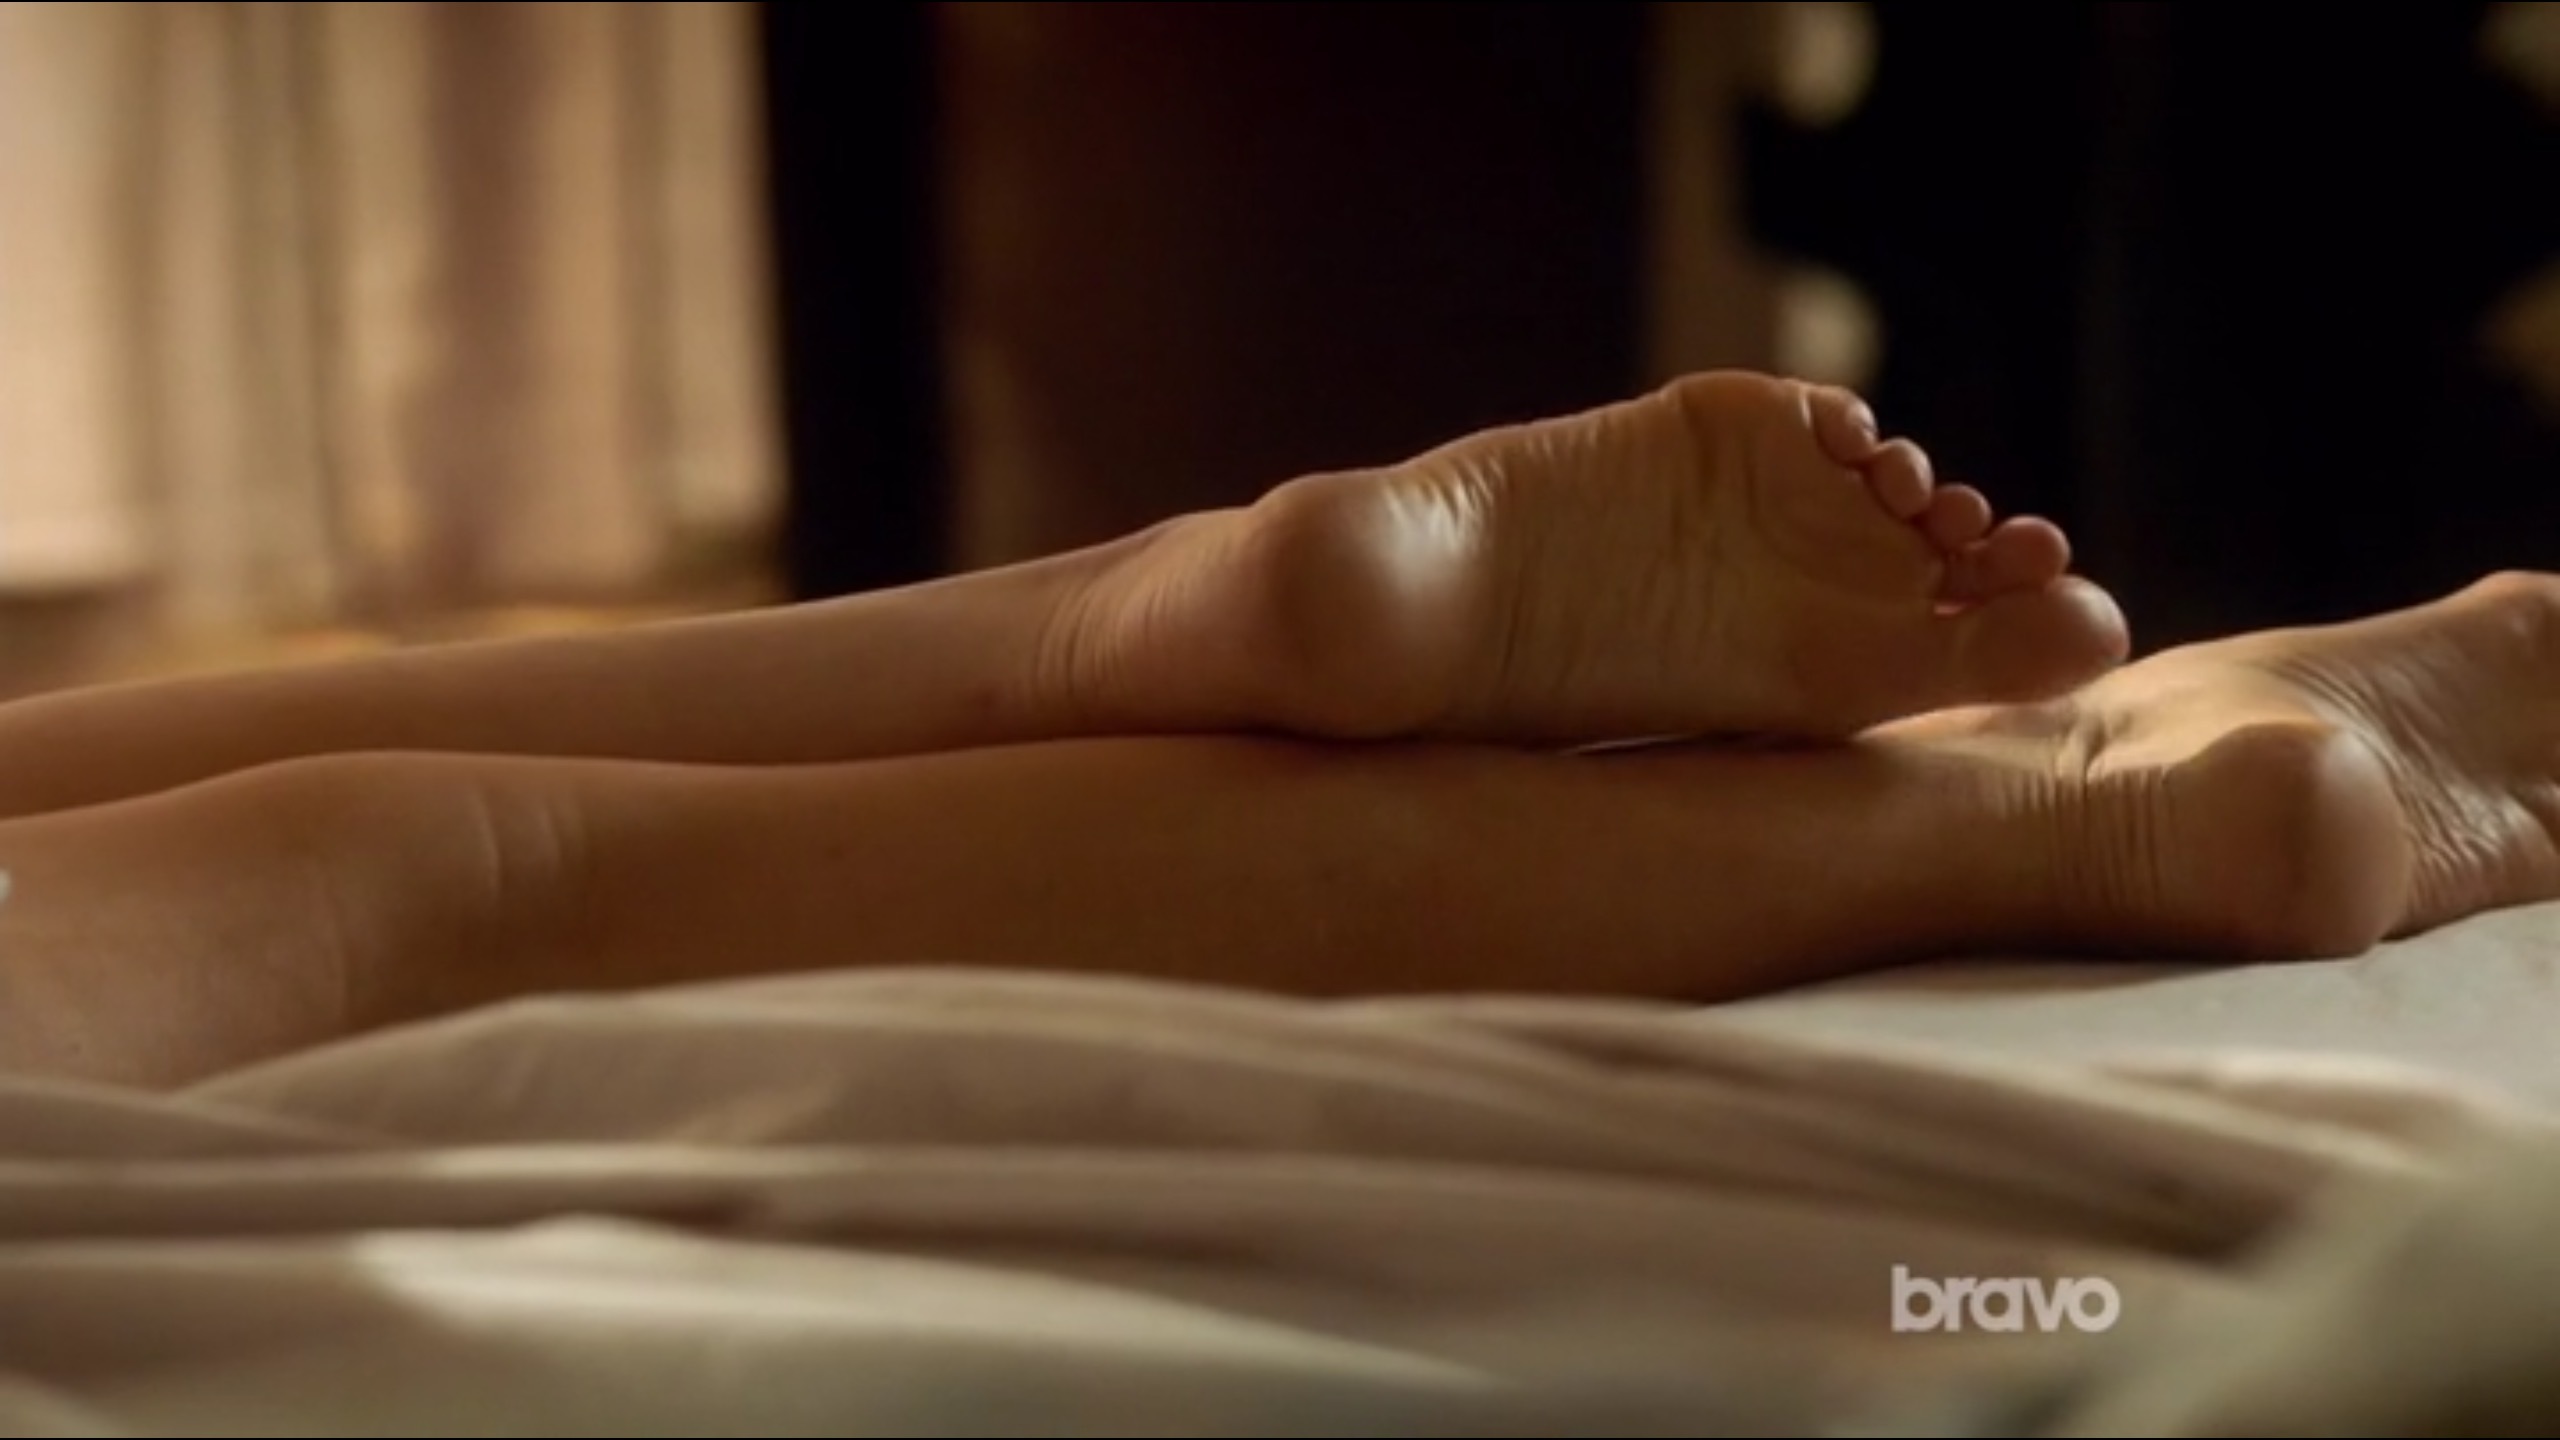 People who liked Sarah Rafferty's feet, also liked.